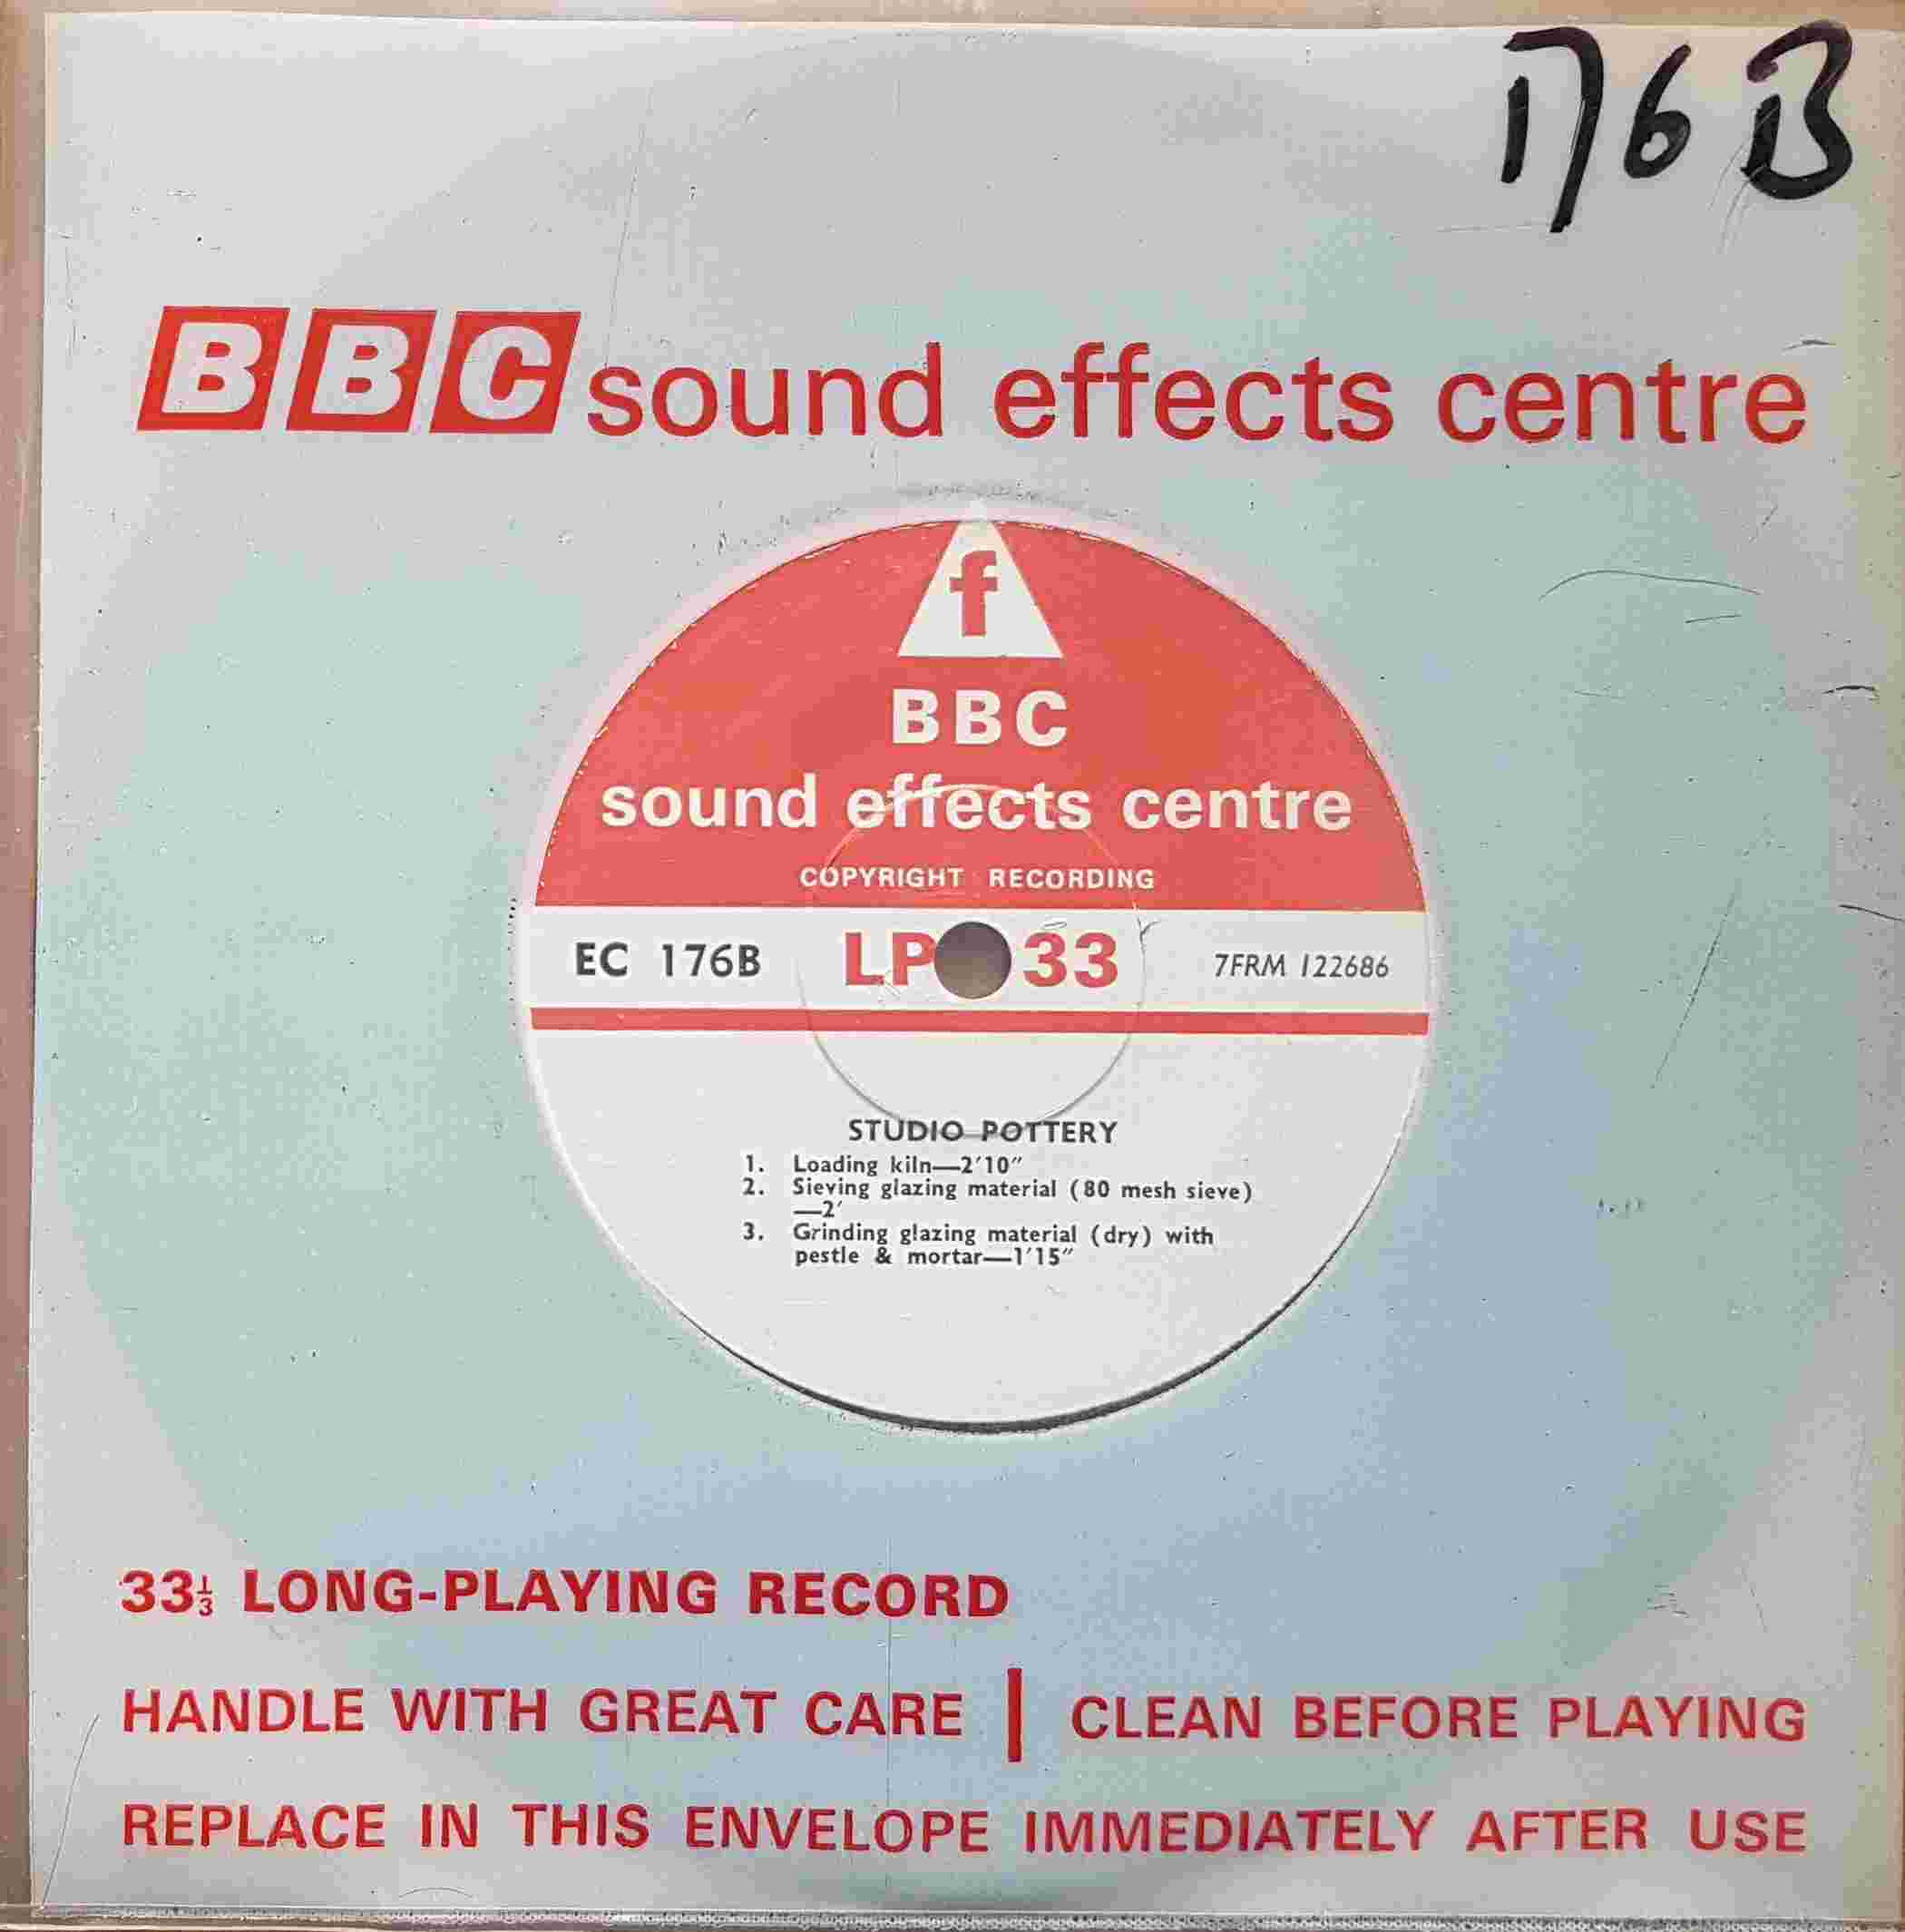 Picture of EC 176B Studio pottery by artist Not registered from the BBC records and Tapes library